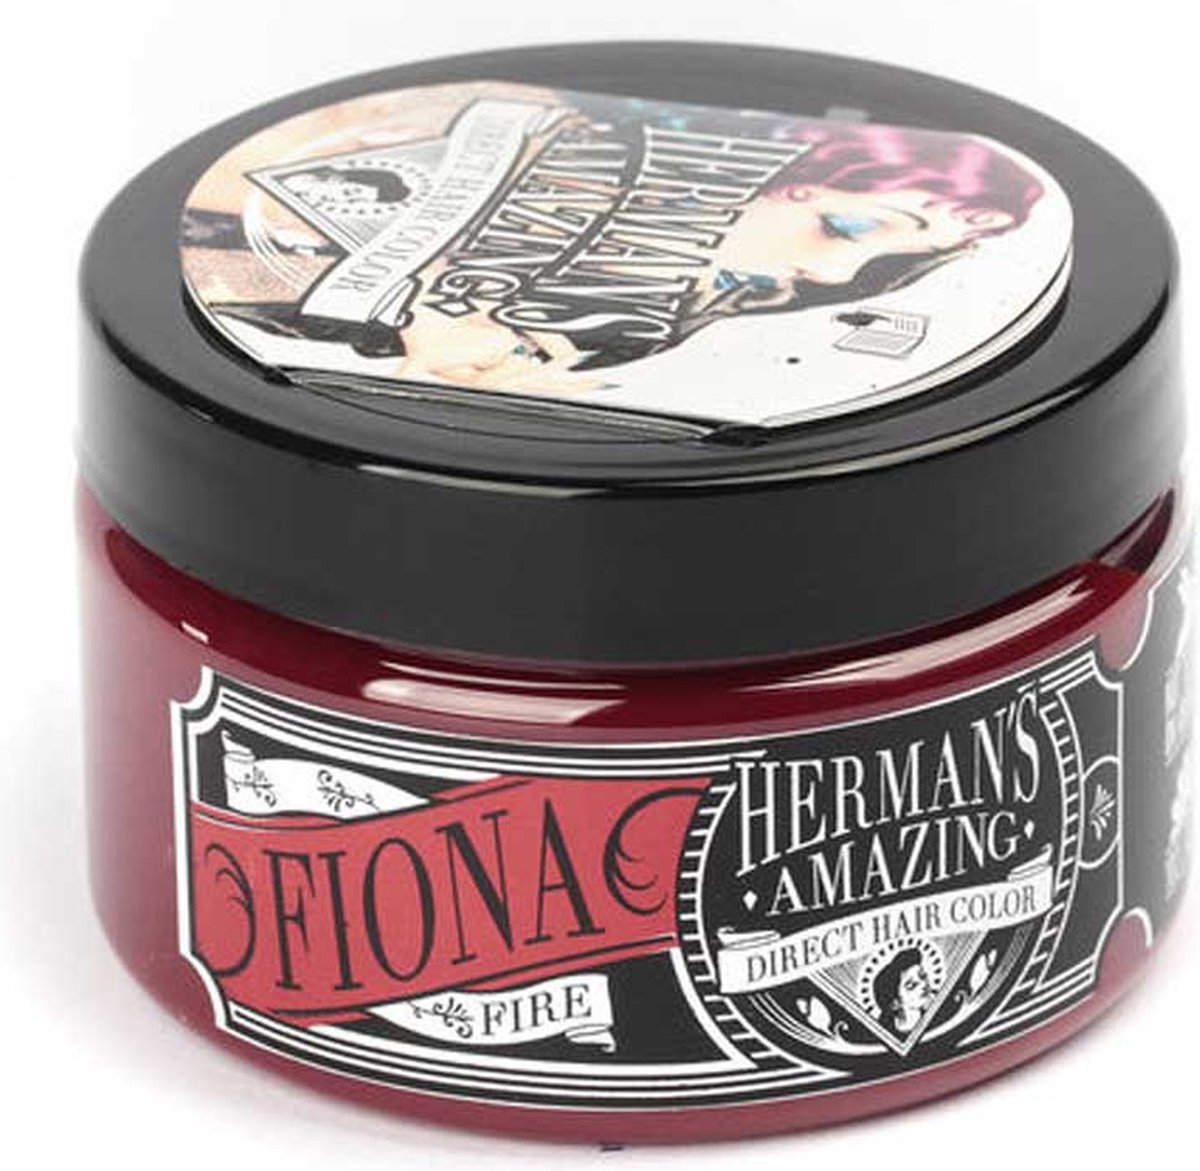 Hermans Amazing Haircolor - Fiona Fire Semi permanente haarverf - Rood